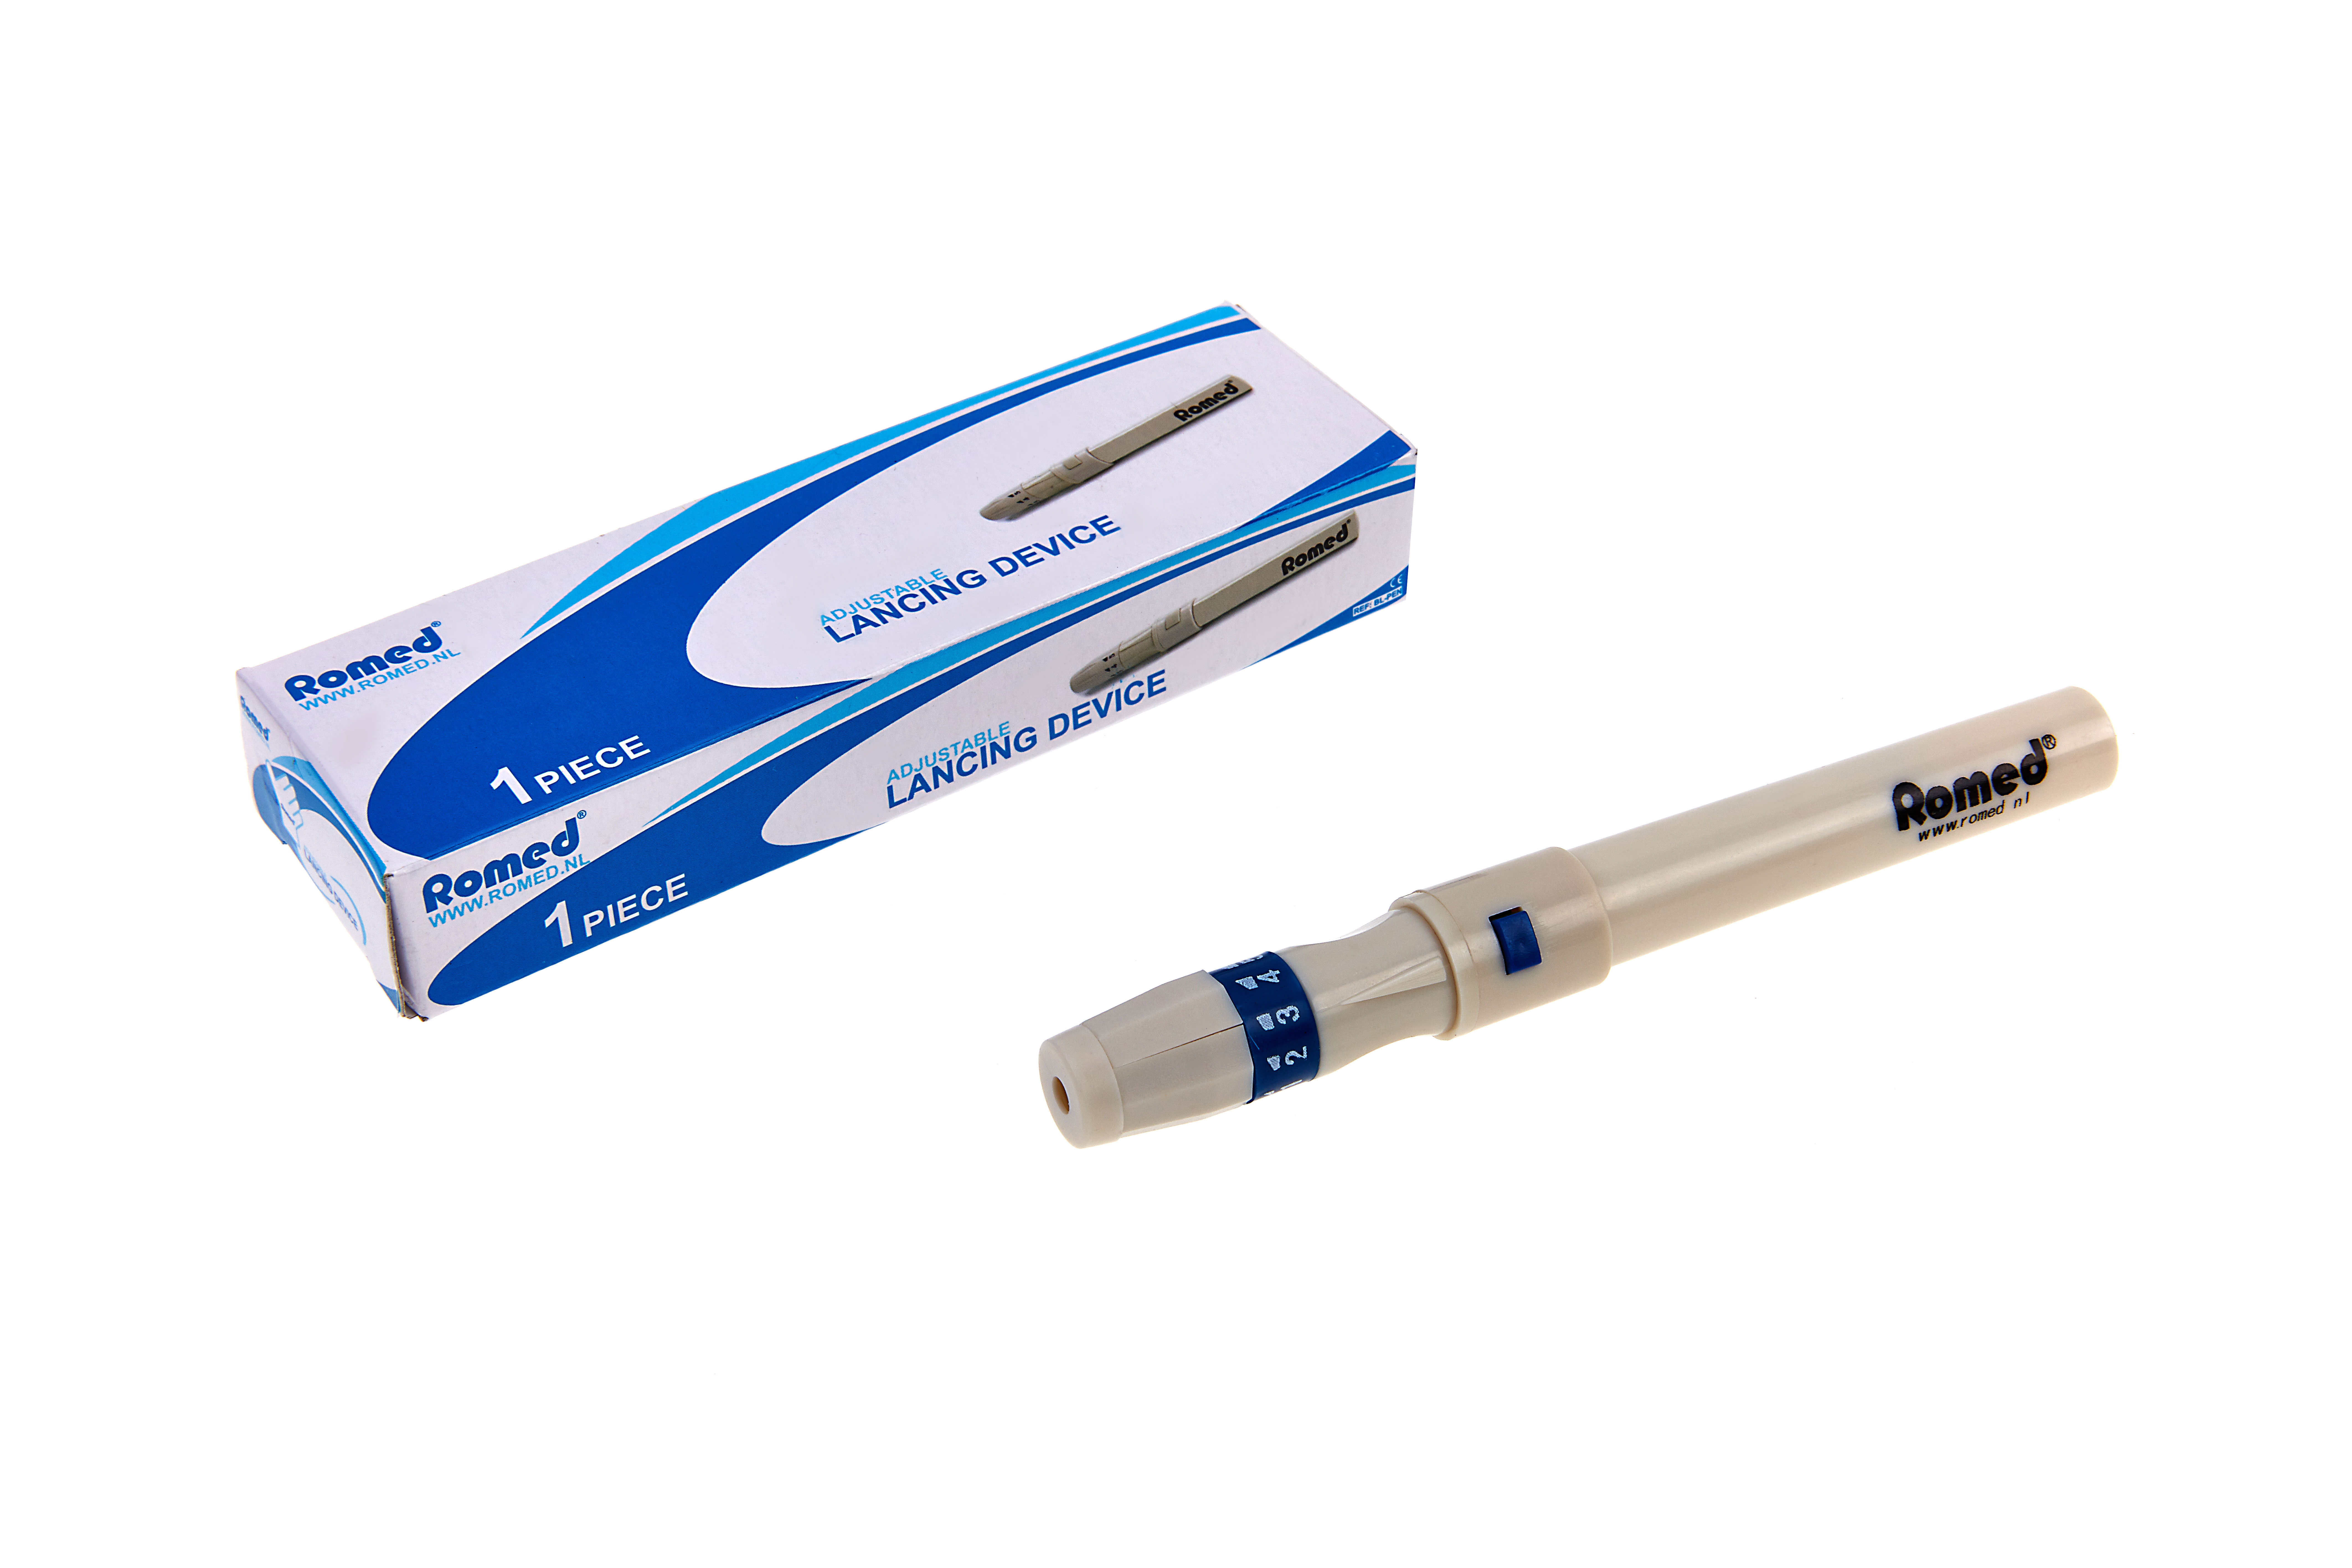 BL-PEN Romed penholder for blood lancets with tribevel, (BL-100TB), individually packed in a box, 100 pcs in a carton.